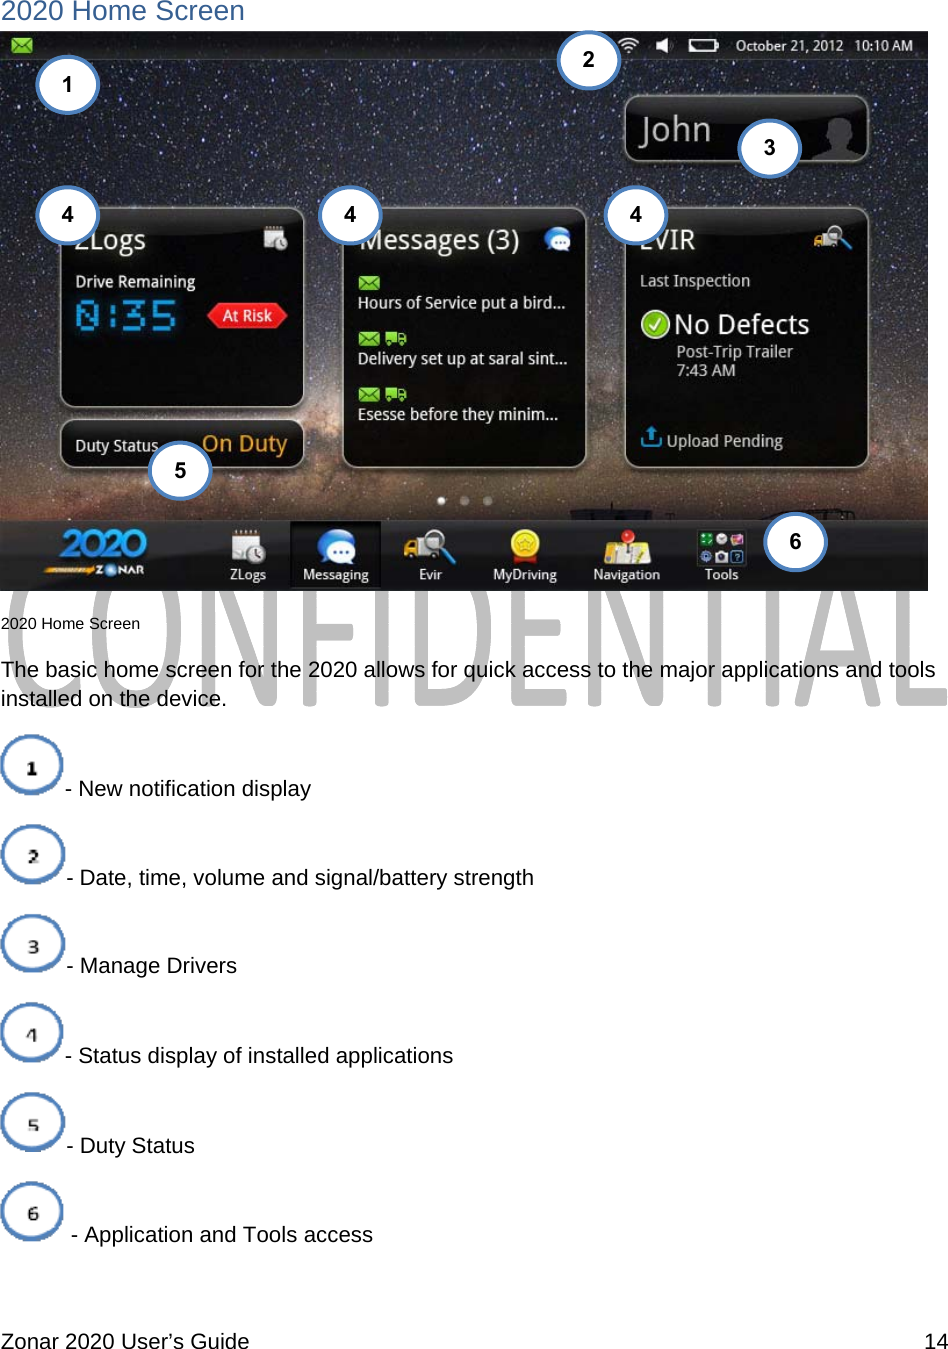  Zonar 2020 User’s Guide    14  2020 Home Screen  2020 Home Screen The basic home screen for the 2020 allows for quick access to the major applications and tools installed on the device.  - New notification display - Date, time, volume and signal/battery strength - Manage Drivers - Status display of installed applications - Duty Status  - Application and Tools access  1 234 5 6 4  4